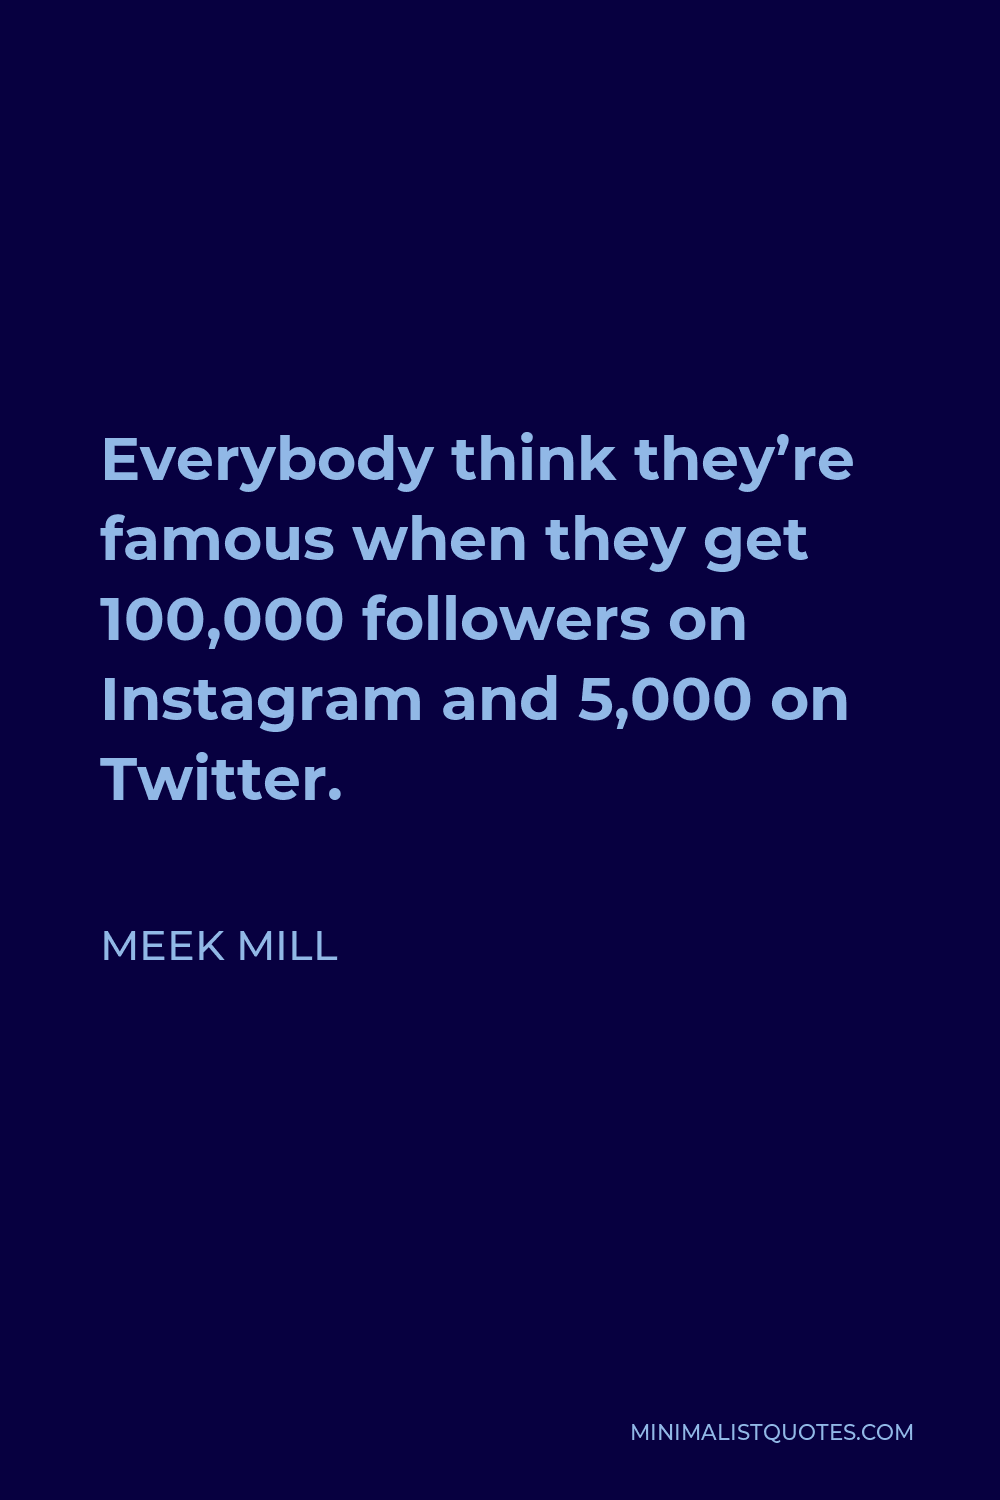 Meek Mill Quote - Everybody think they’re famous when they get 100,000 followers on Instagram and 5,000 on Twitter.